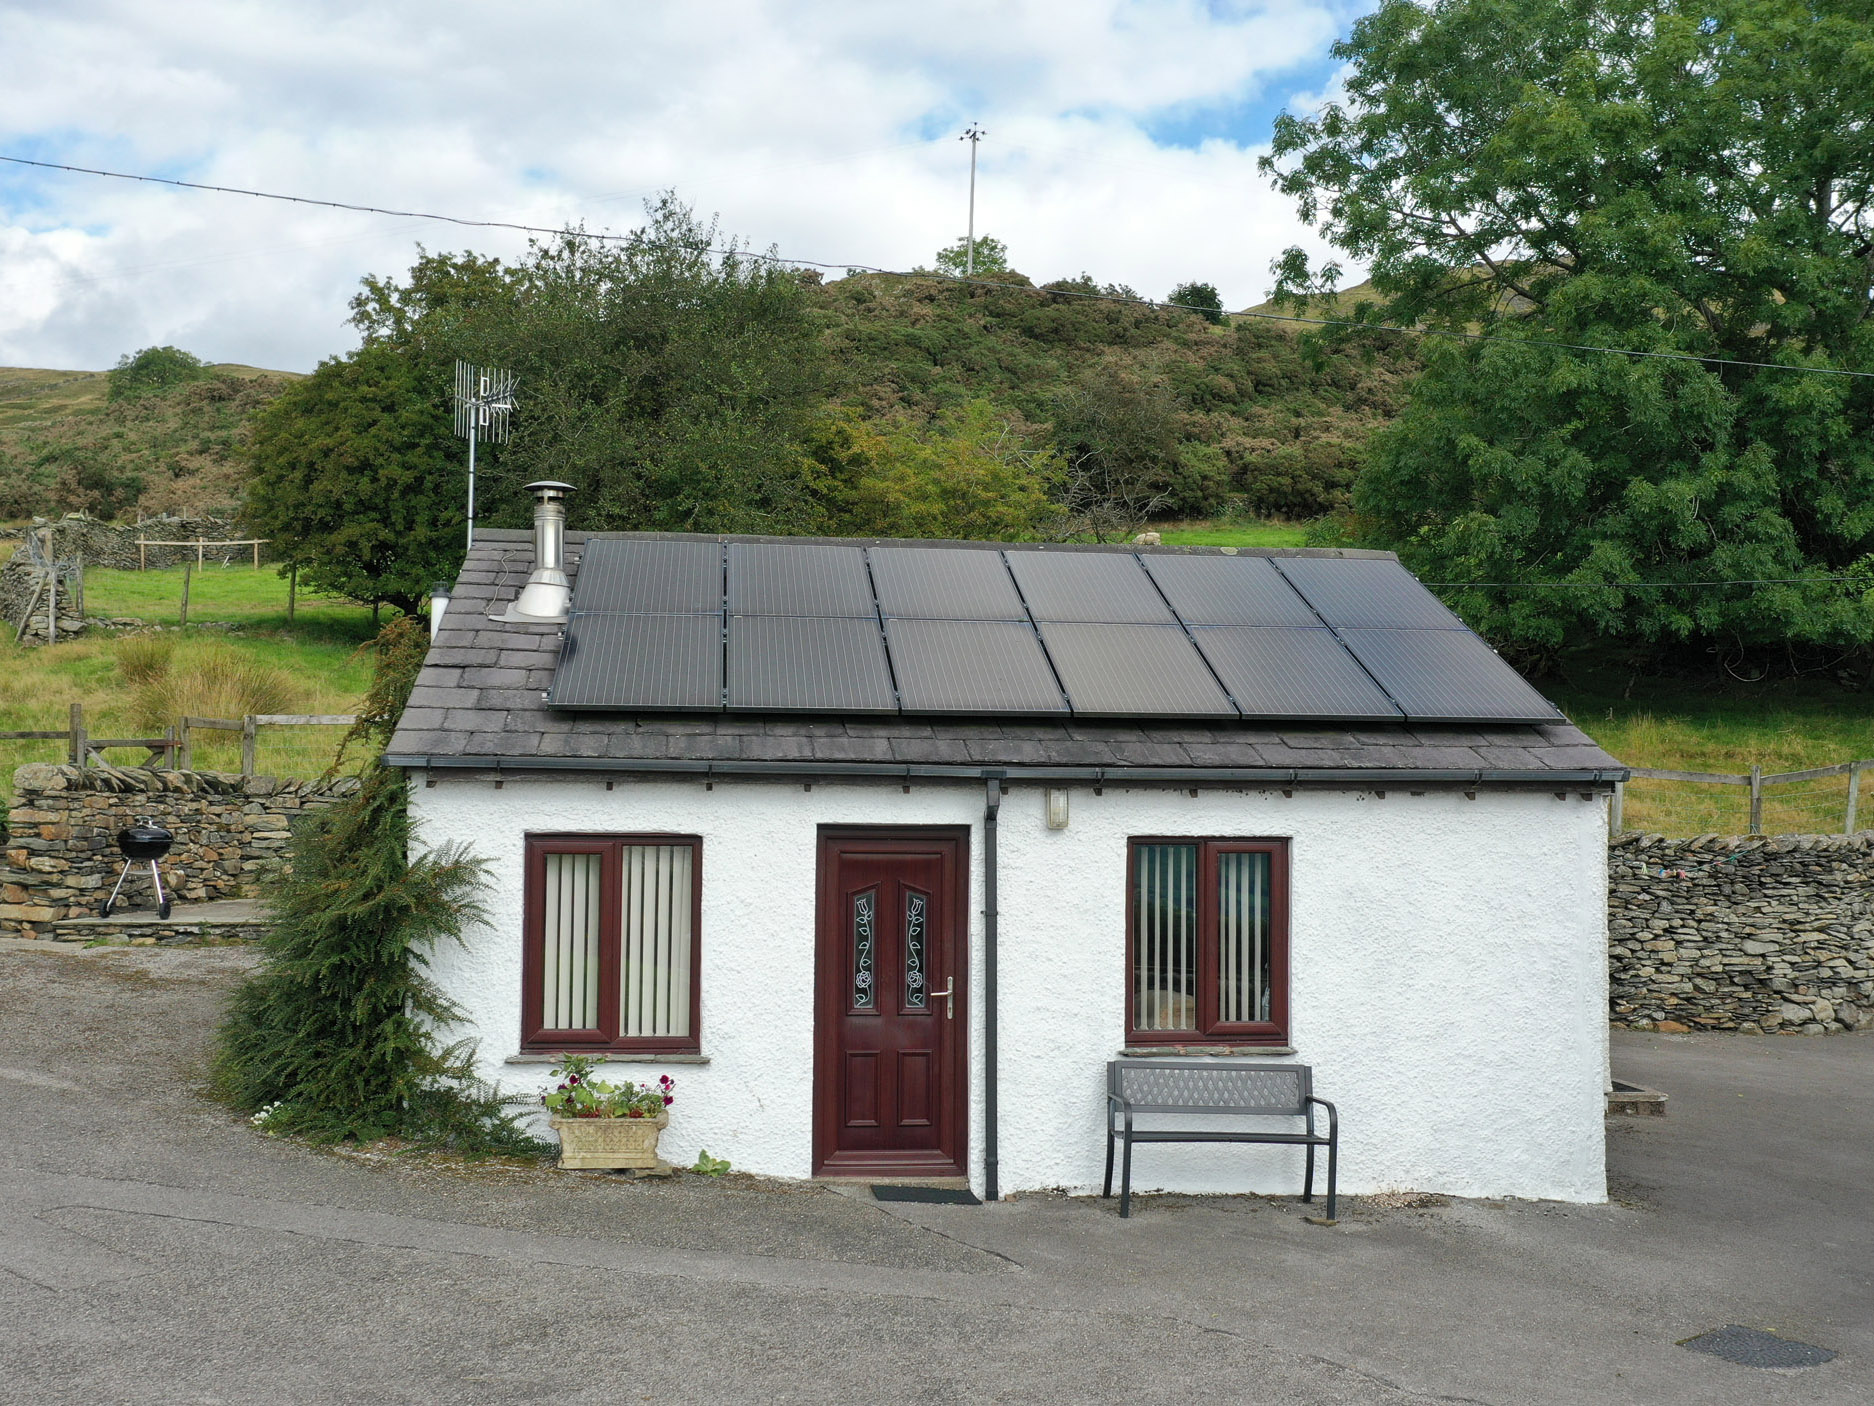 Ghyll Bank Bungalow, The Lake District and Cumbria